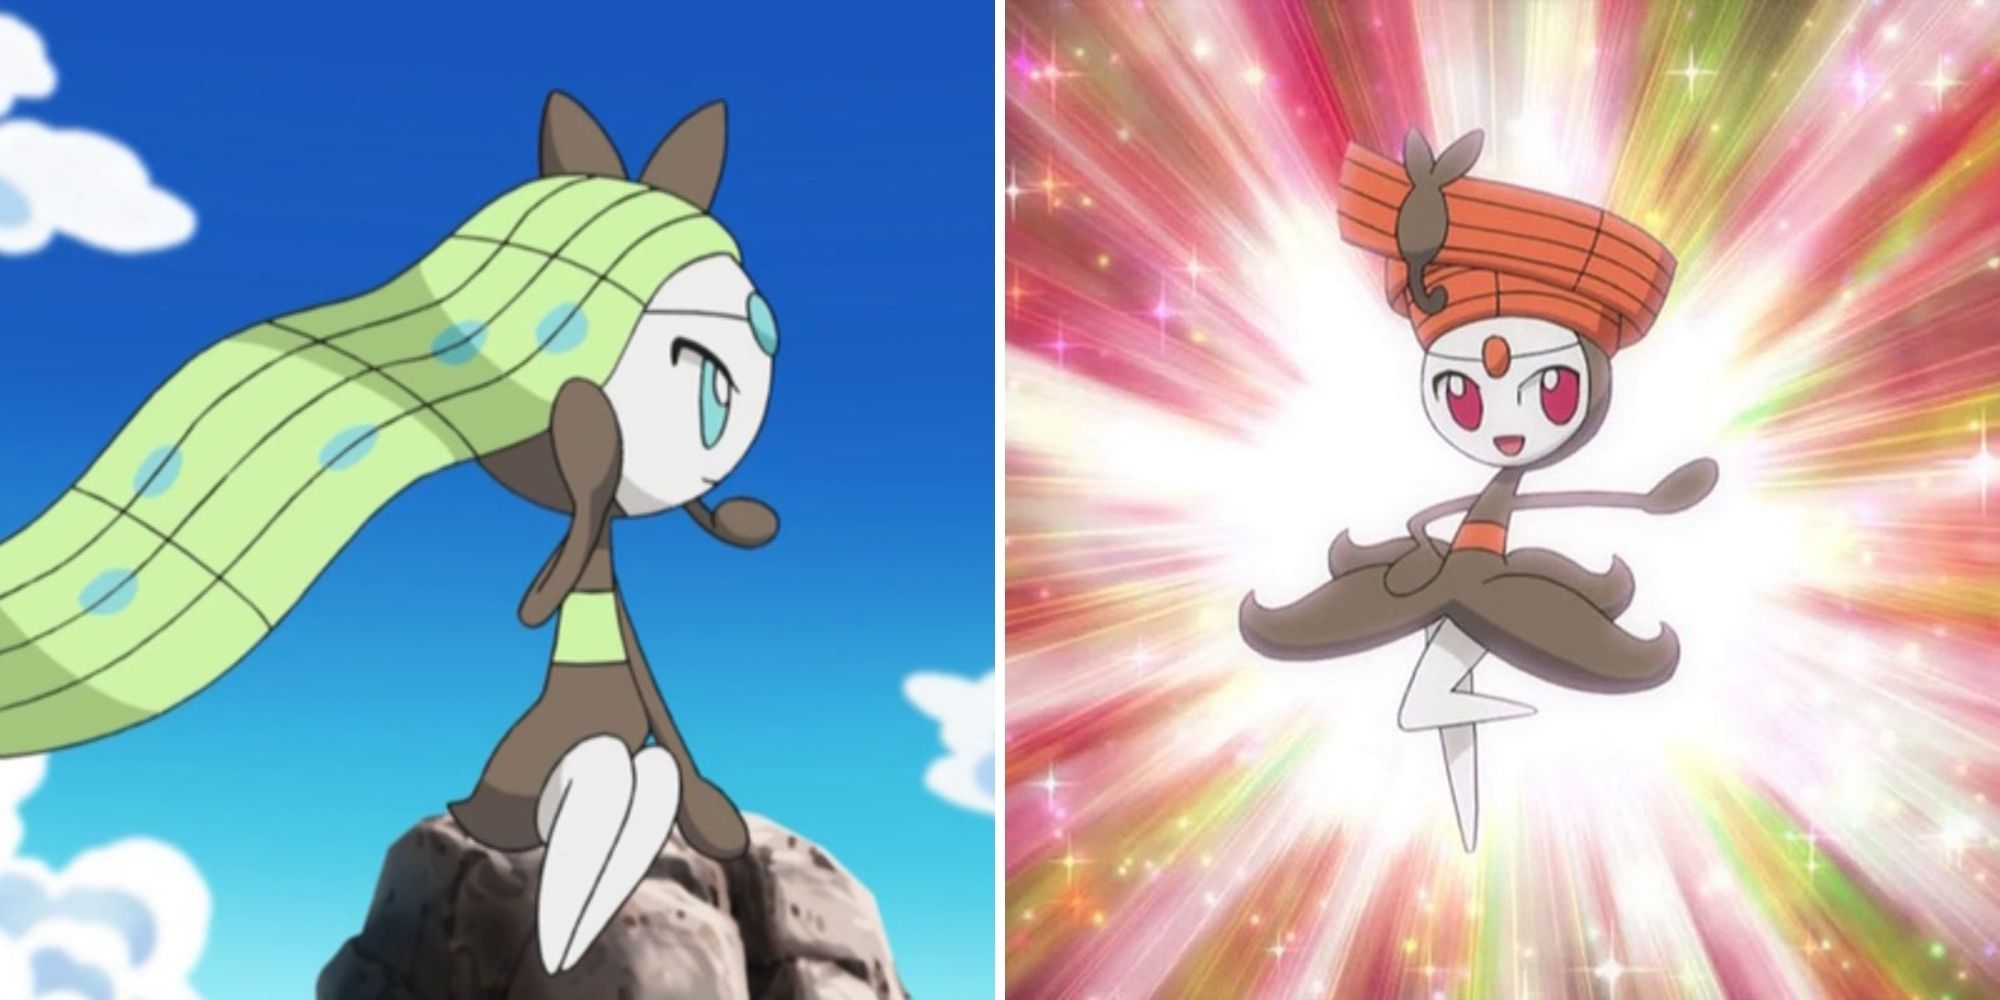 Aria Meloetta sits on a roack and Pirouette Meloetta stands on one leg